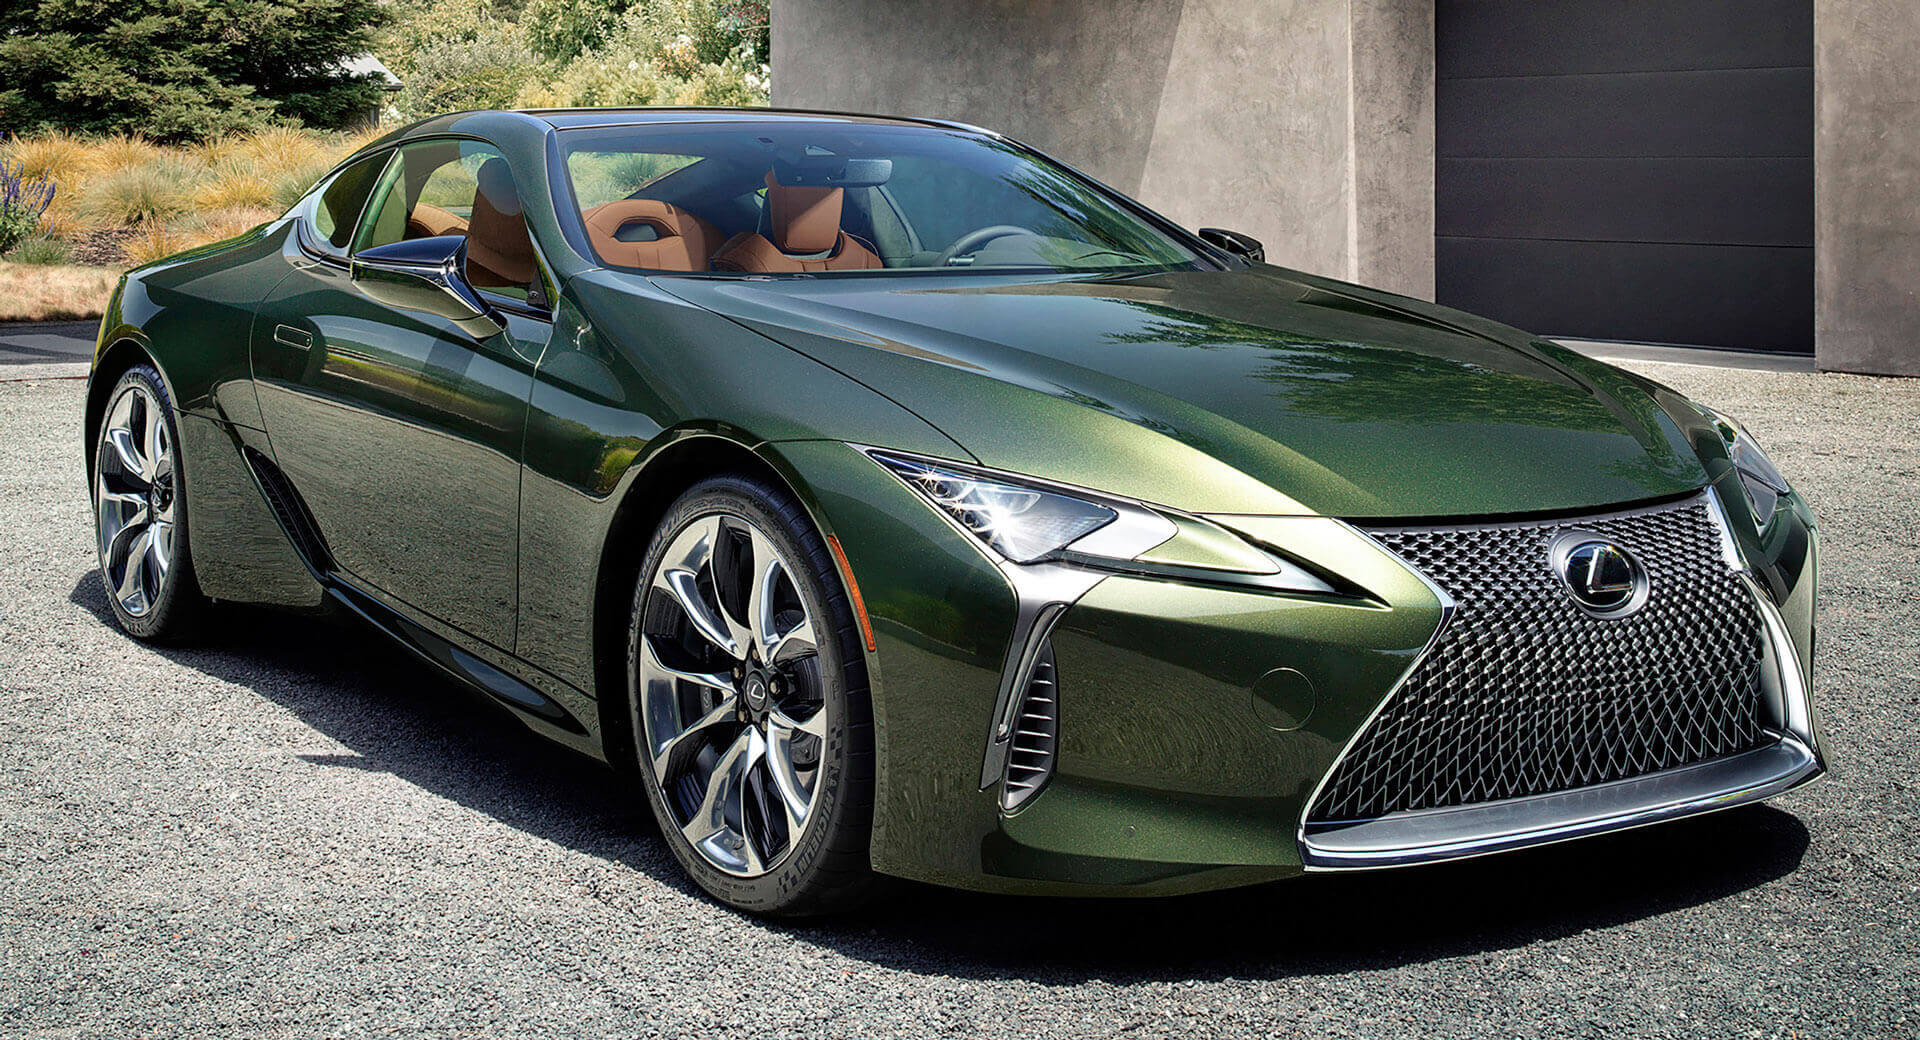 2020 Lexus LC 500 Goes “Green” With Inspiration Series Limited Edition